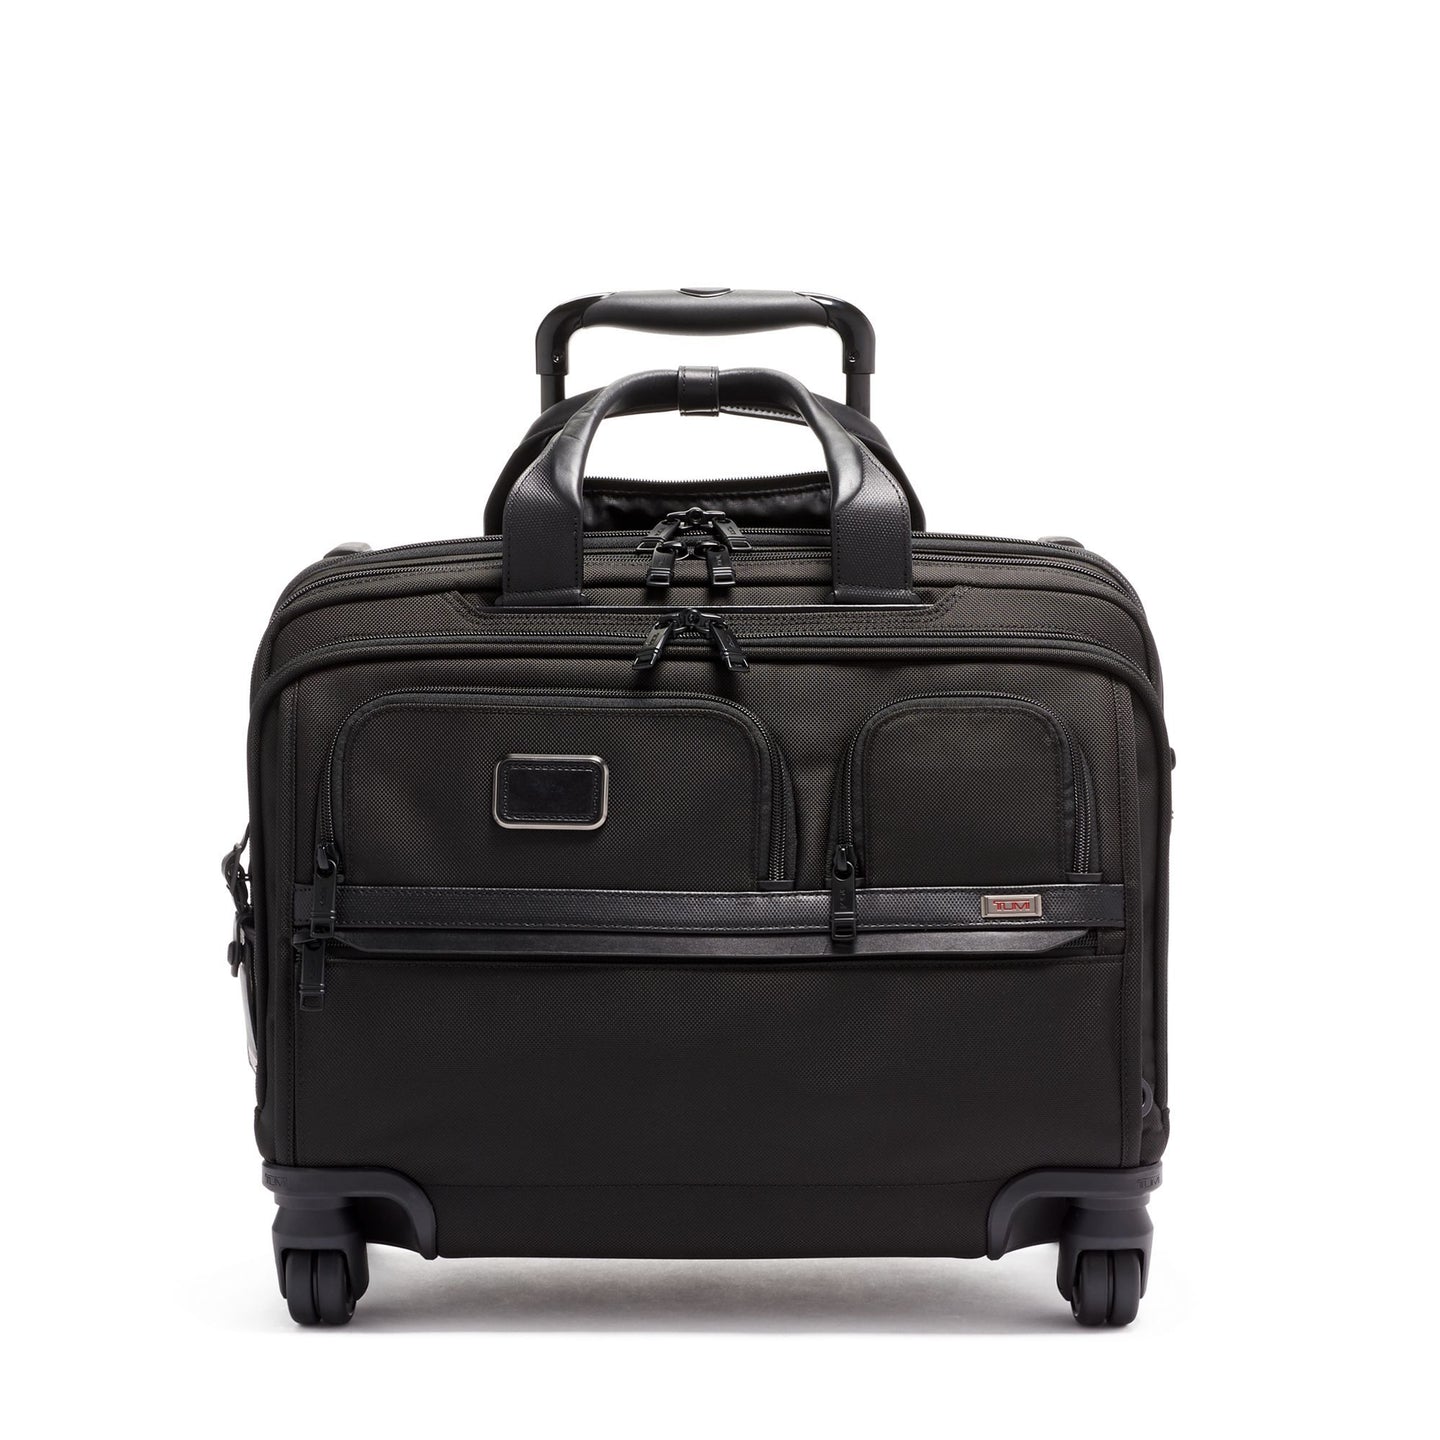 Deluxe 4 Wheeled Laptop Case Brief Alpha 3 Collection